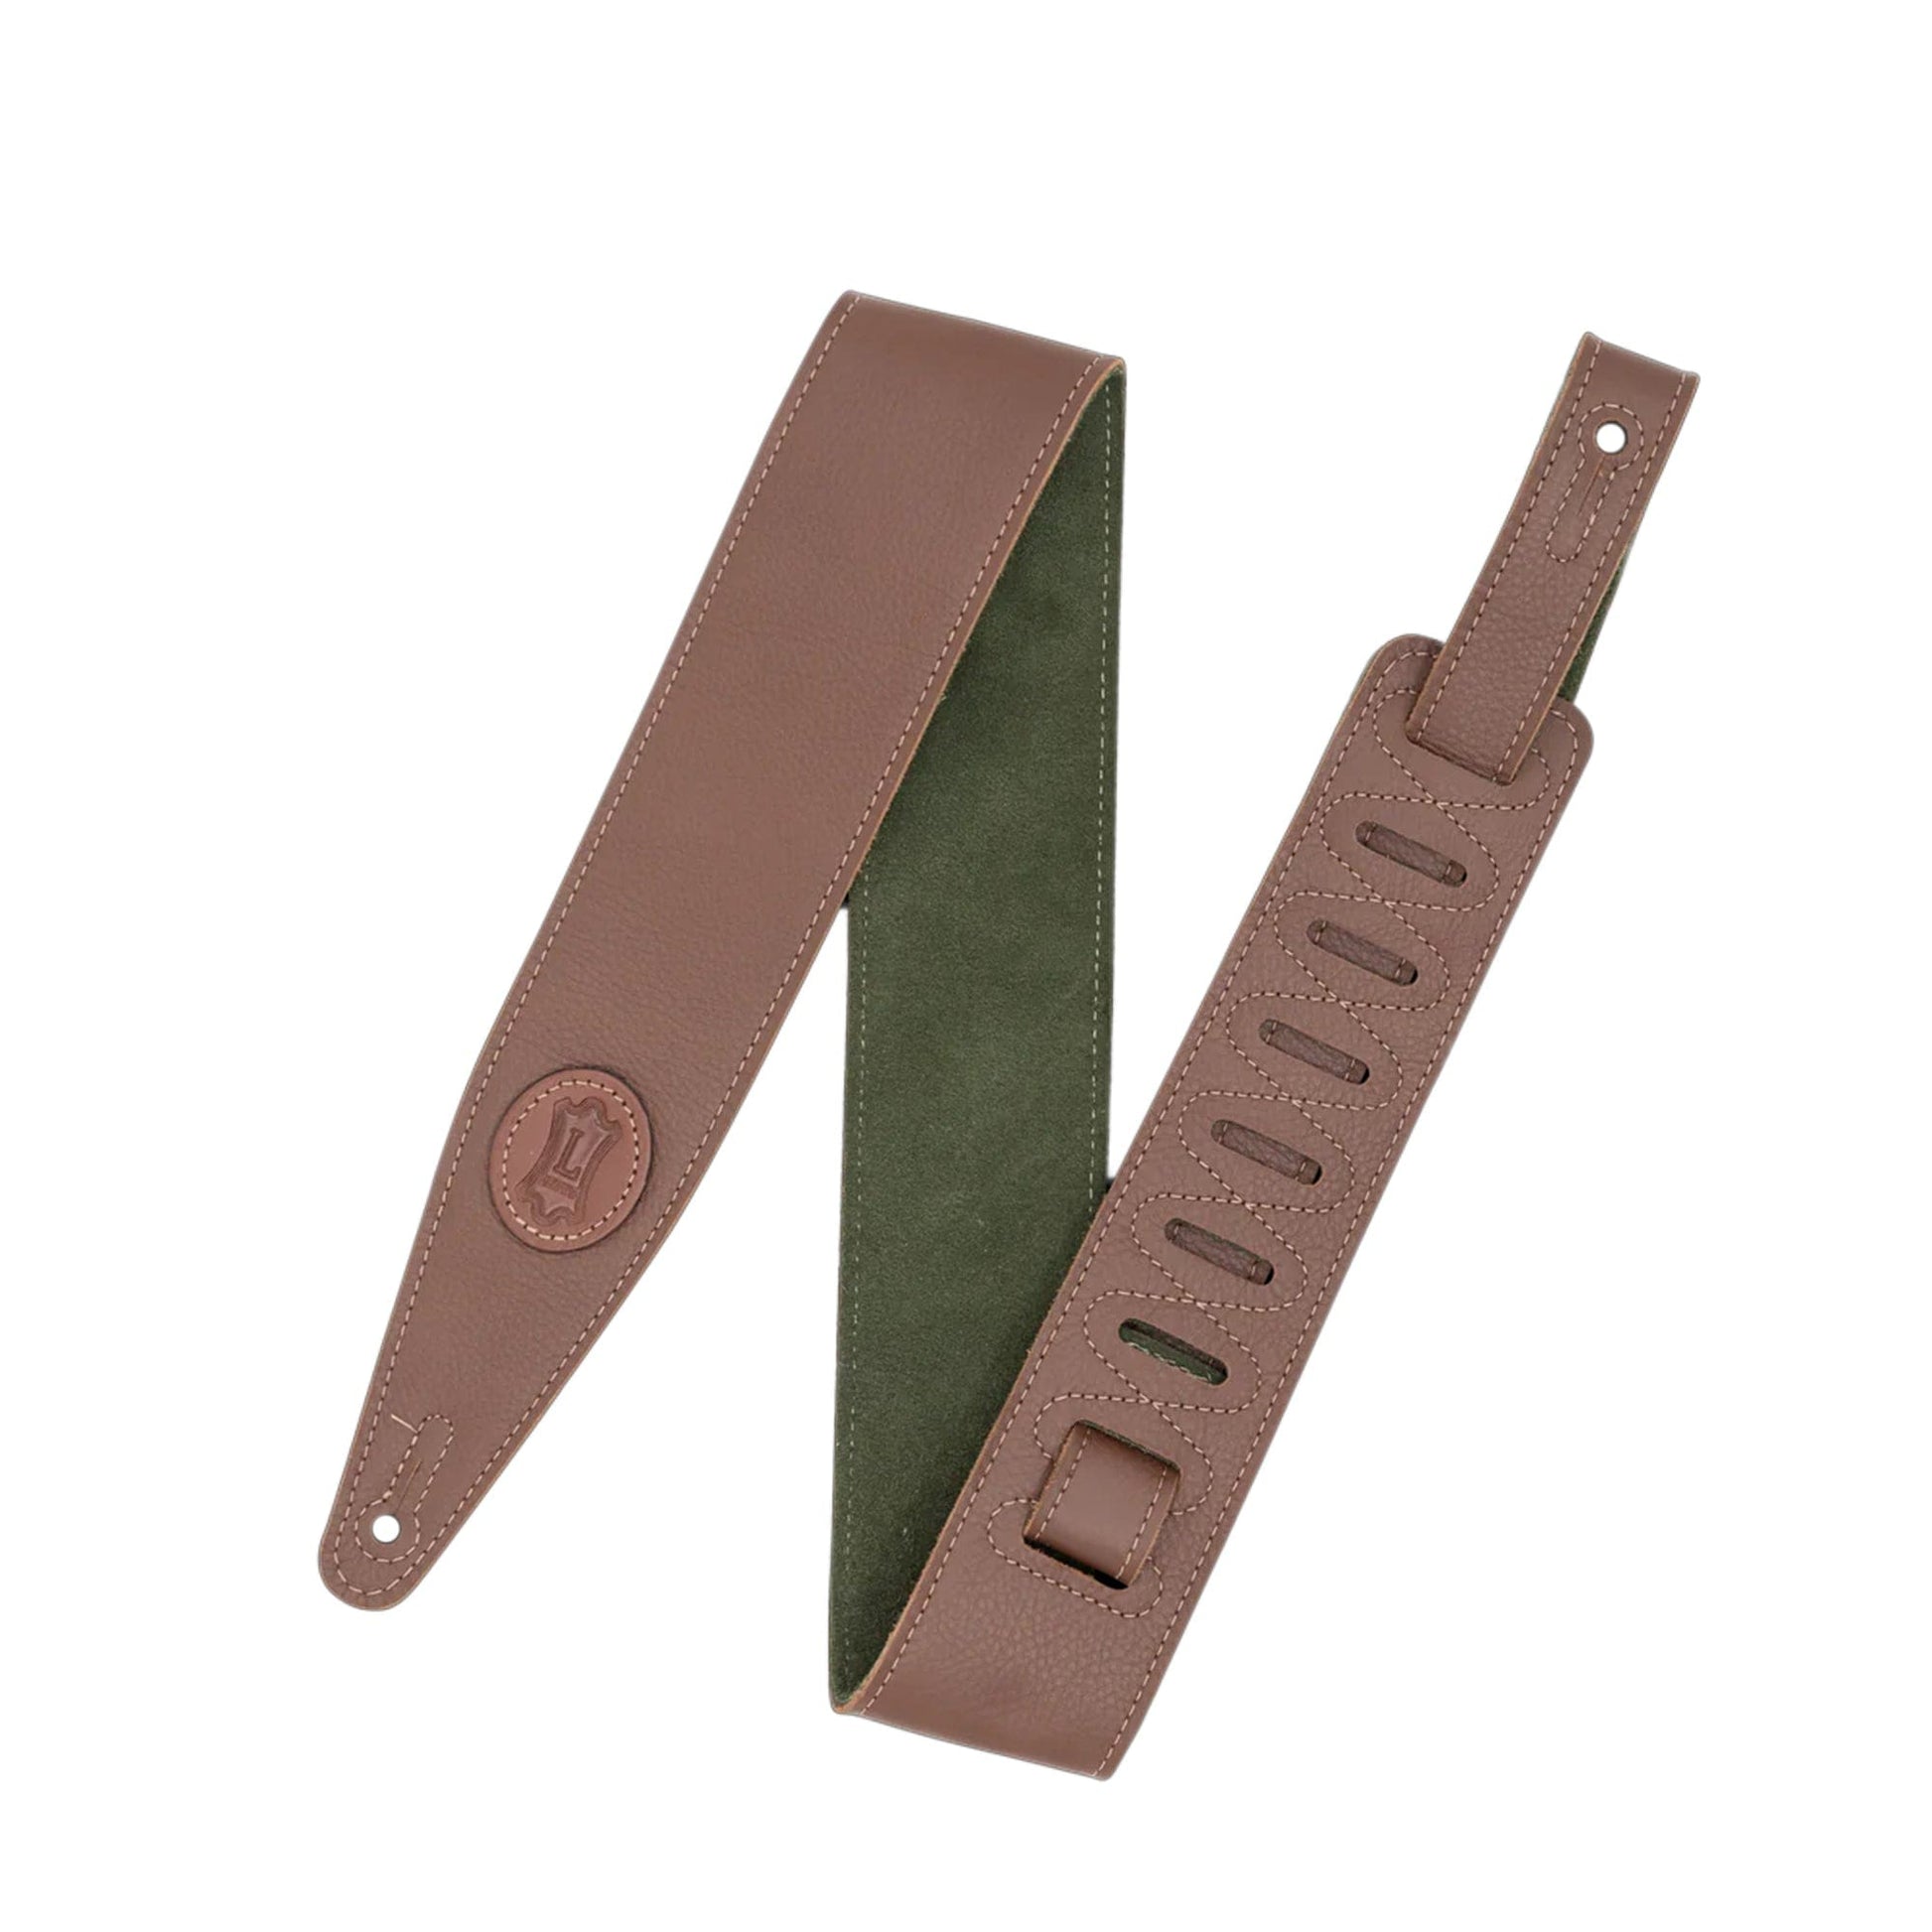 Levy's 2.5" Garment Leather Strap Brown w/Olive Green Suede Backing Accessories / Straps